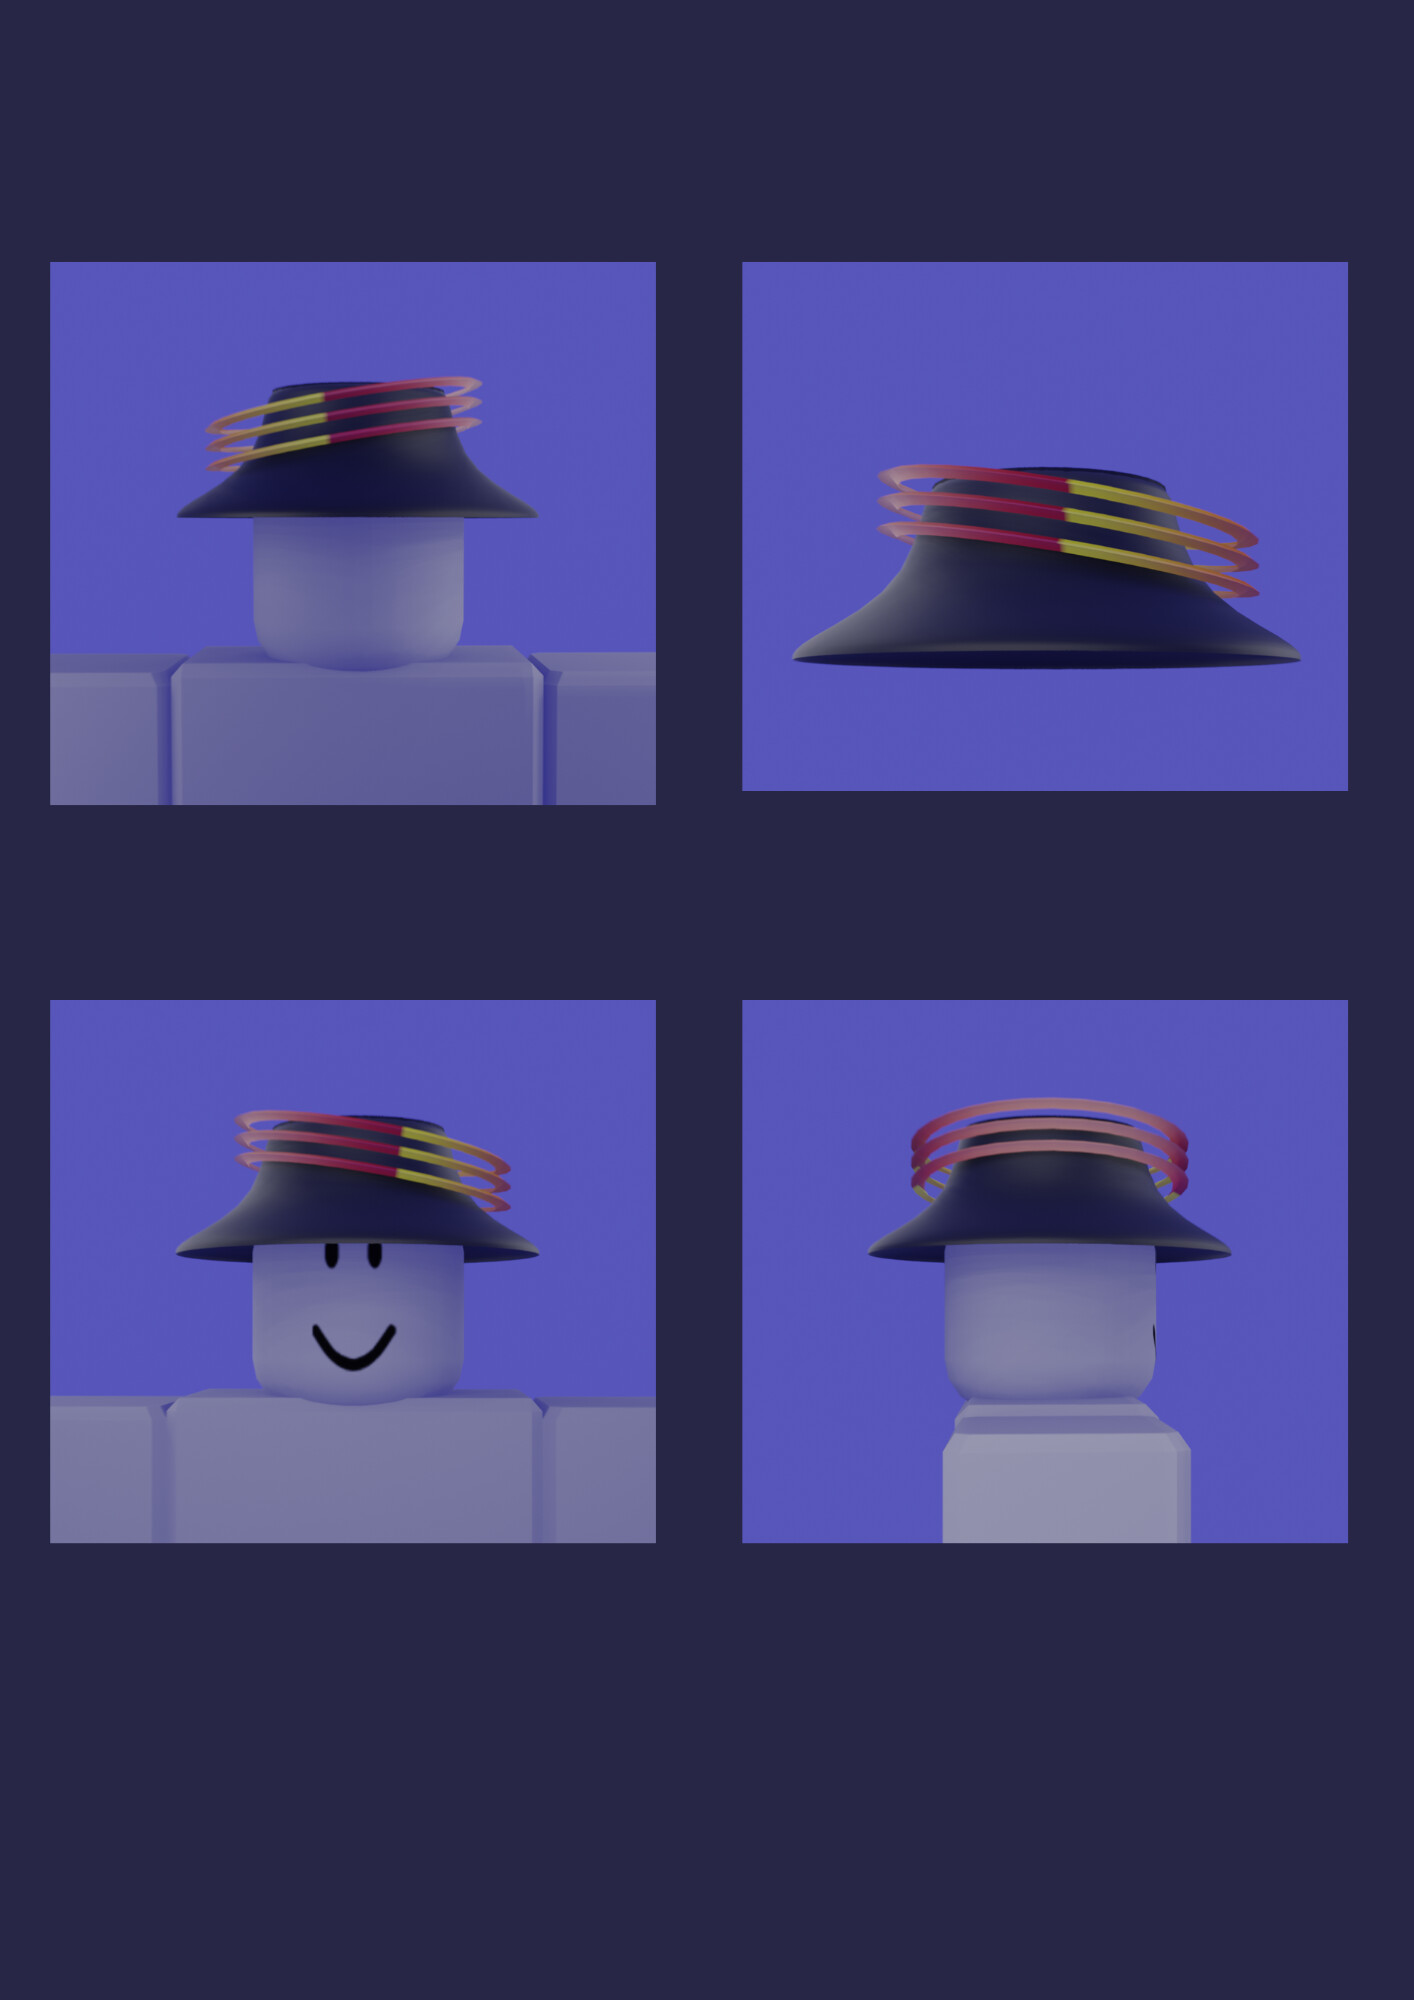 reddi41 on X: The New Roblox Test Hats were Transferred over to the Test  UGC Hat Account Holder and now are deleted. More testing before Limiteds  2.0 releases. Link:  Hat Links